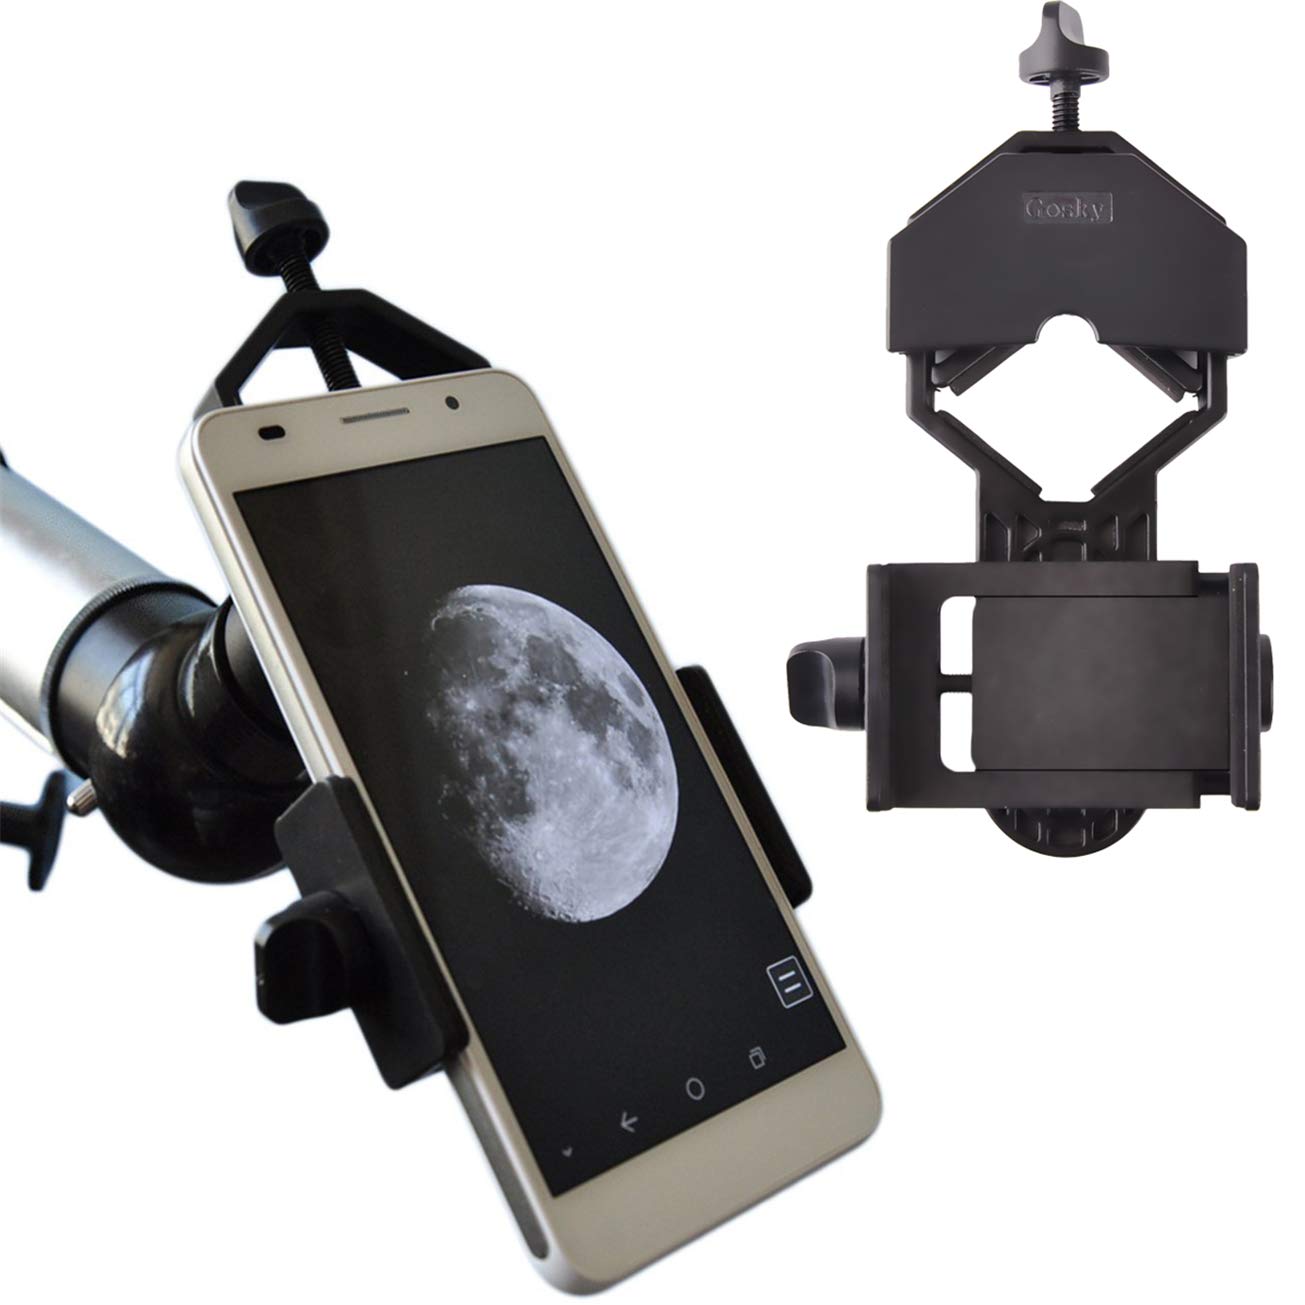 Book Cover GOSKY Smartphone Adapter Mount Regular Size - Compatible with Binoculars, Monoculars, Spotting Scopes, Telescope, Microscopes - Fits almost all Smartphones on the Market - Record Nature and The World Standard